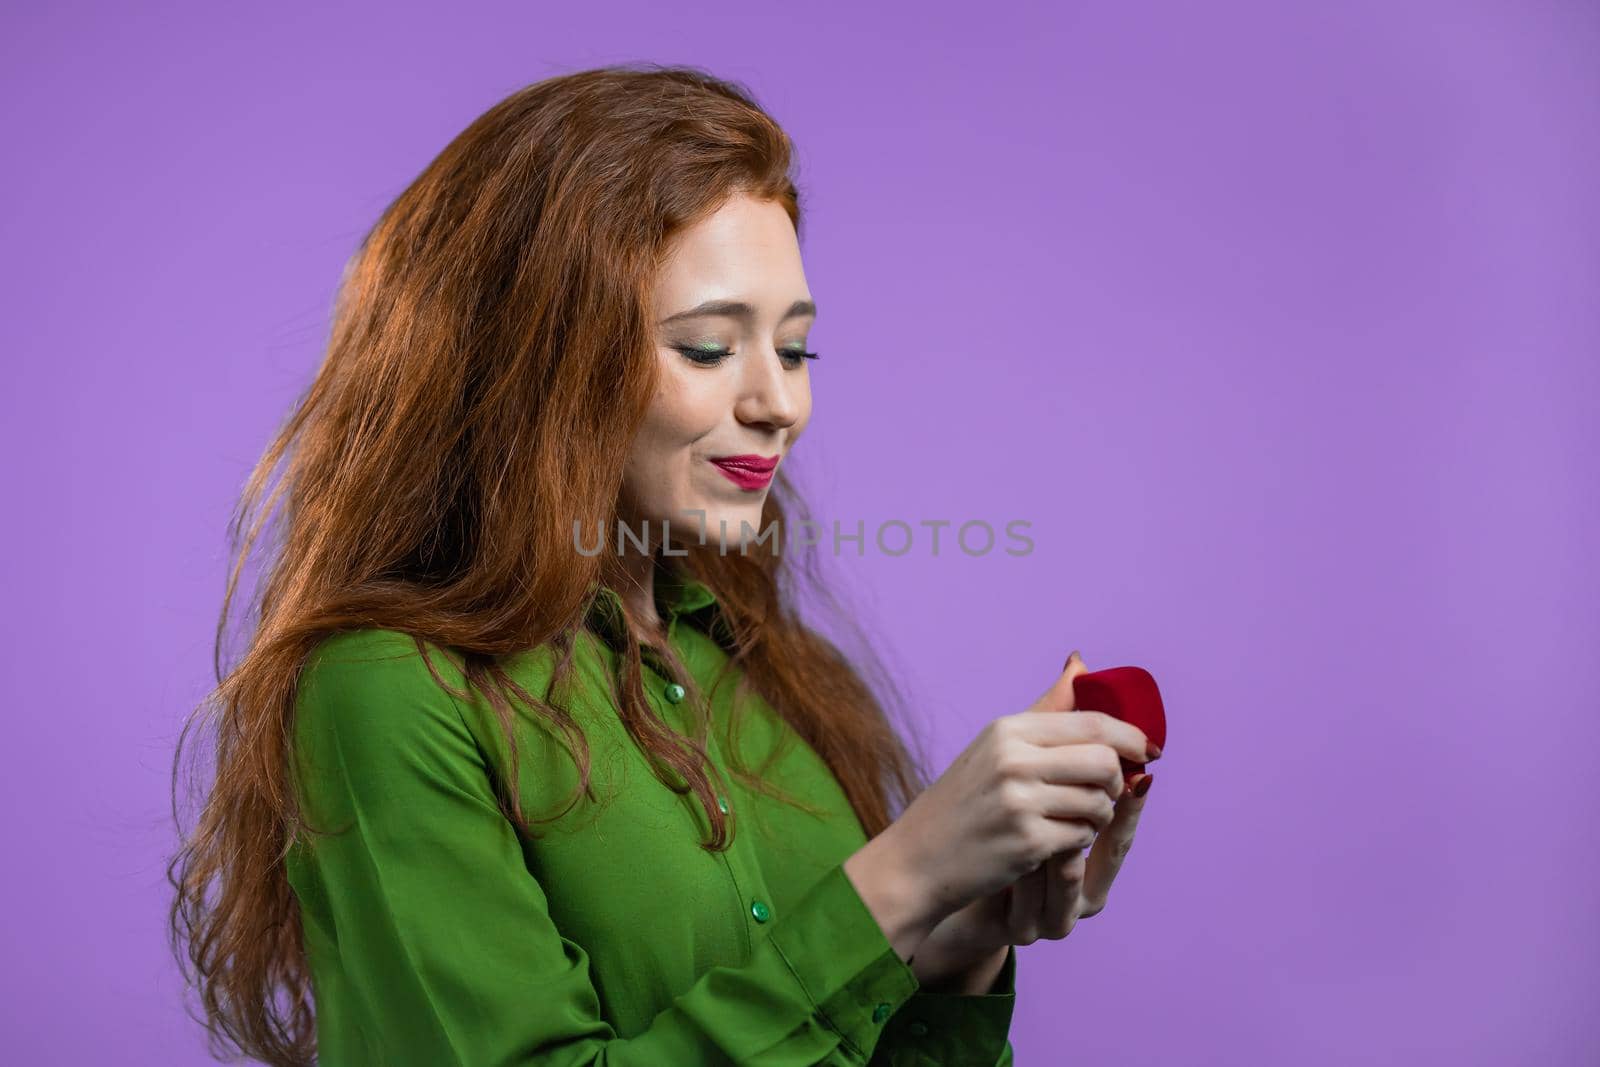 Attractive woman holding small jewelry box with proposal diamond ring on violet wall background. Lady smiling, she is happy to get present, proposition for marriage by kristina_kokhanova